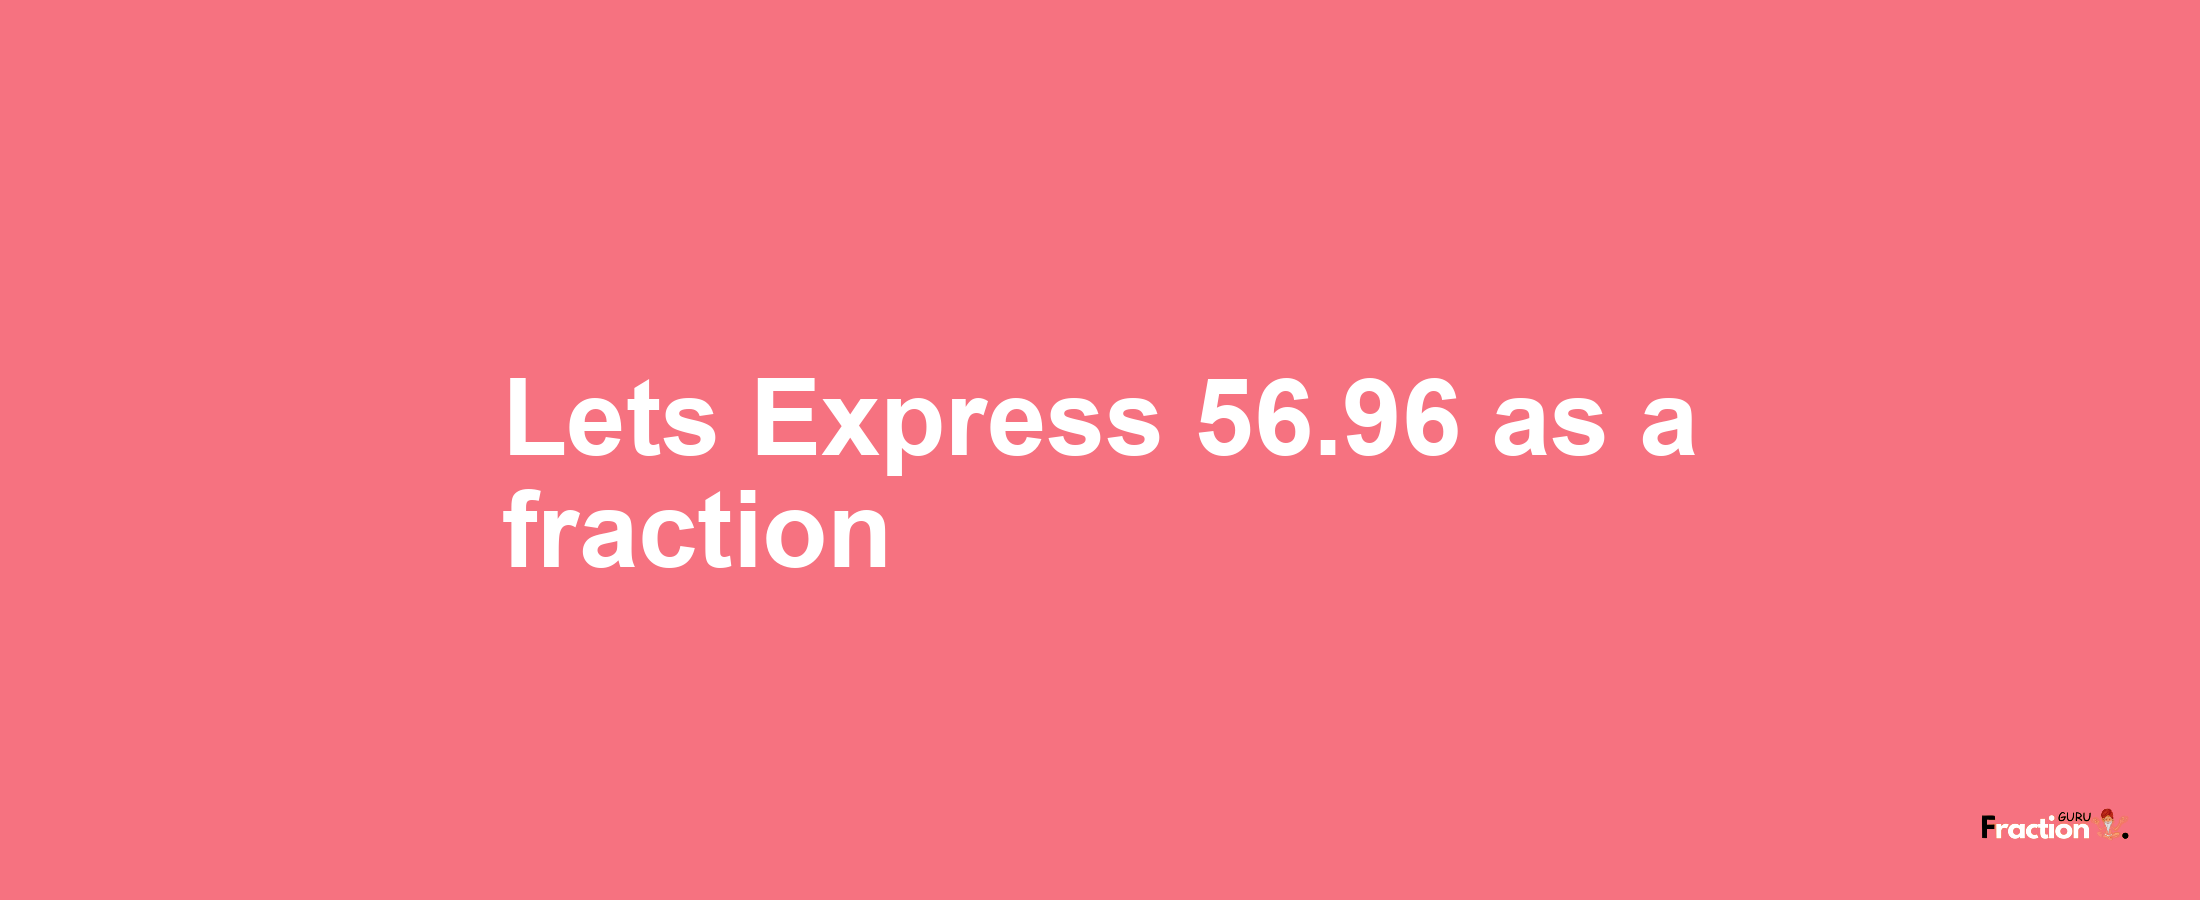 Lets Express 56.96 as afraction